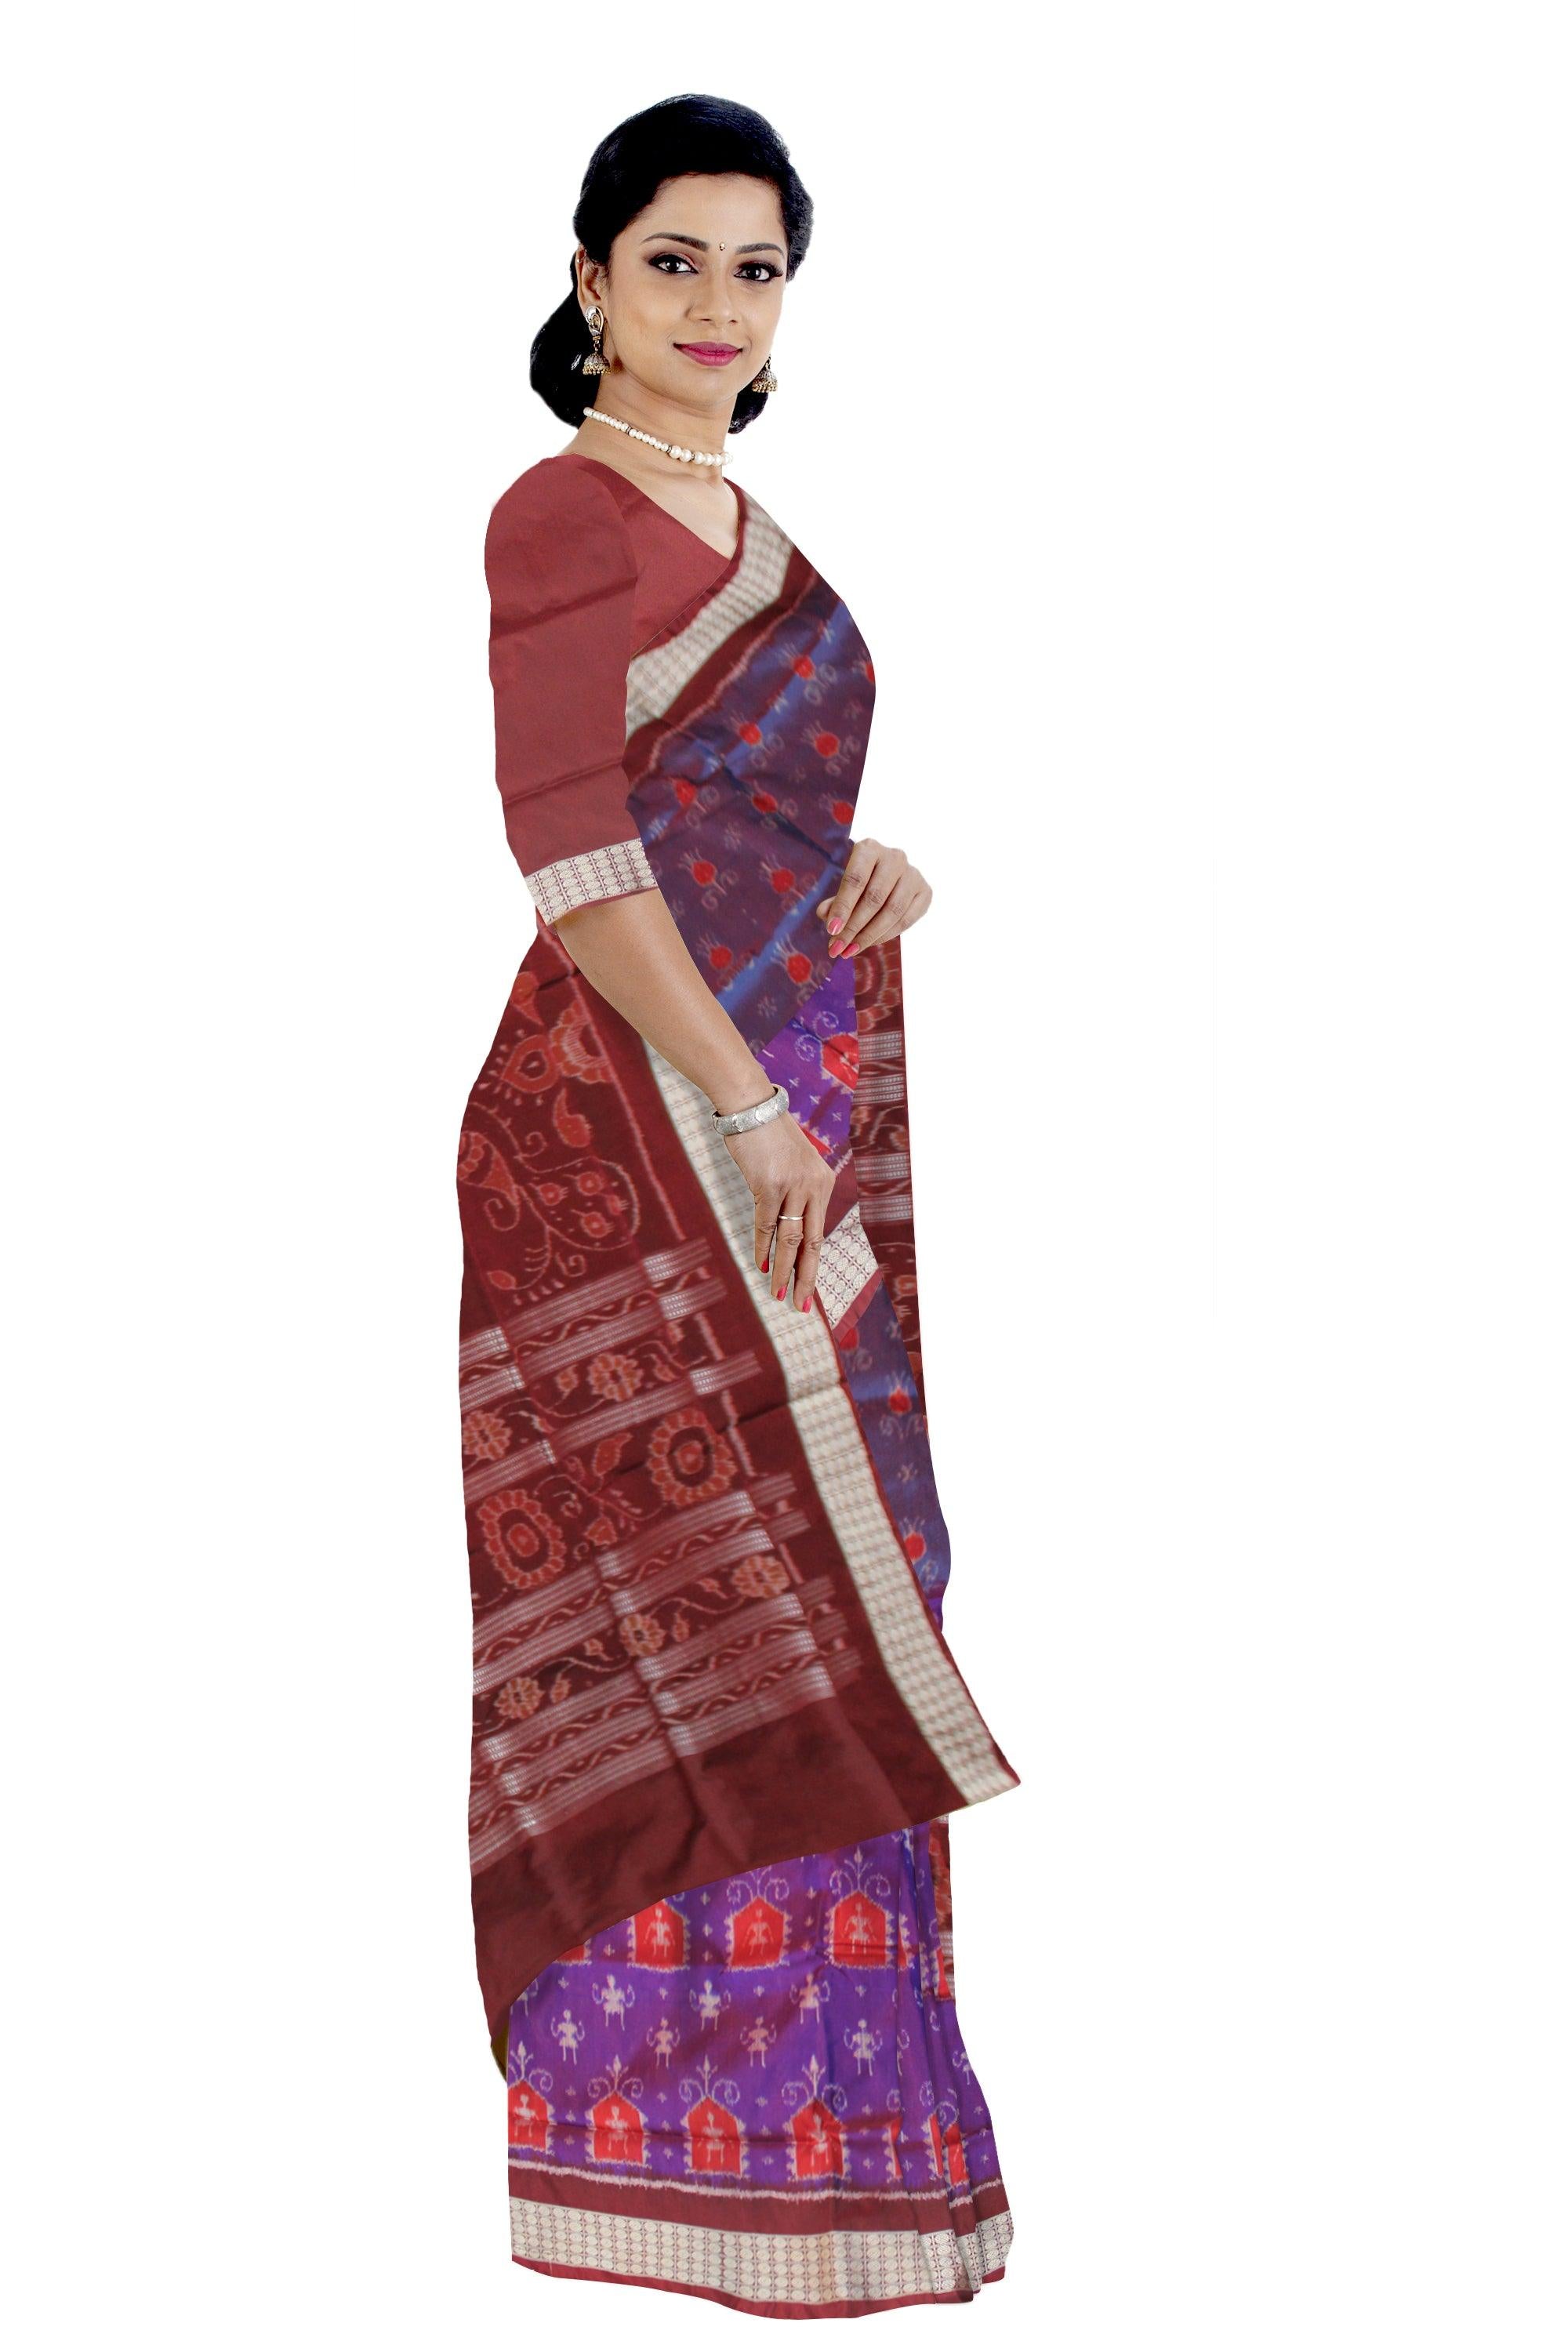 LATEST TRADITIONAL  PATTERN BODY TERRACOTTA PATTERN PATA SAREE IS PURPLE AND COFFEE COLOR BASE, ATTACHED WITH MATCHING BLOUSE PIECE. - Koshali Arts & Crafts Enterprise